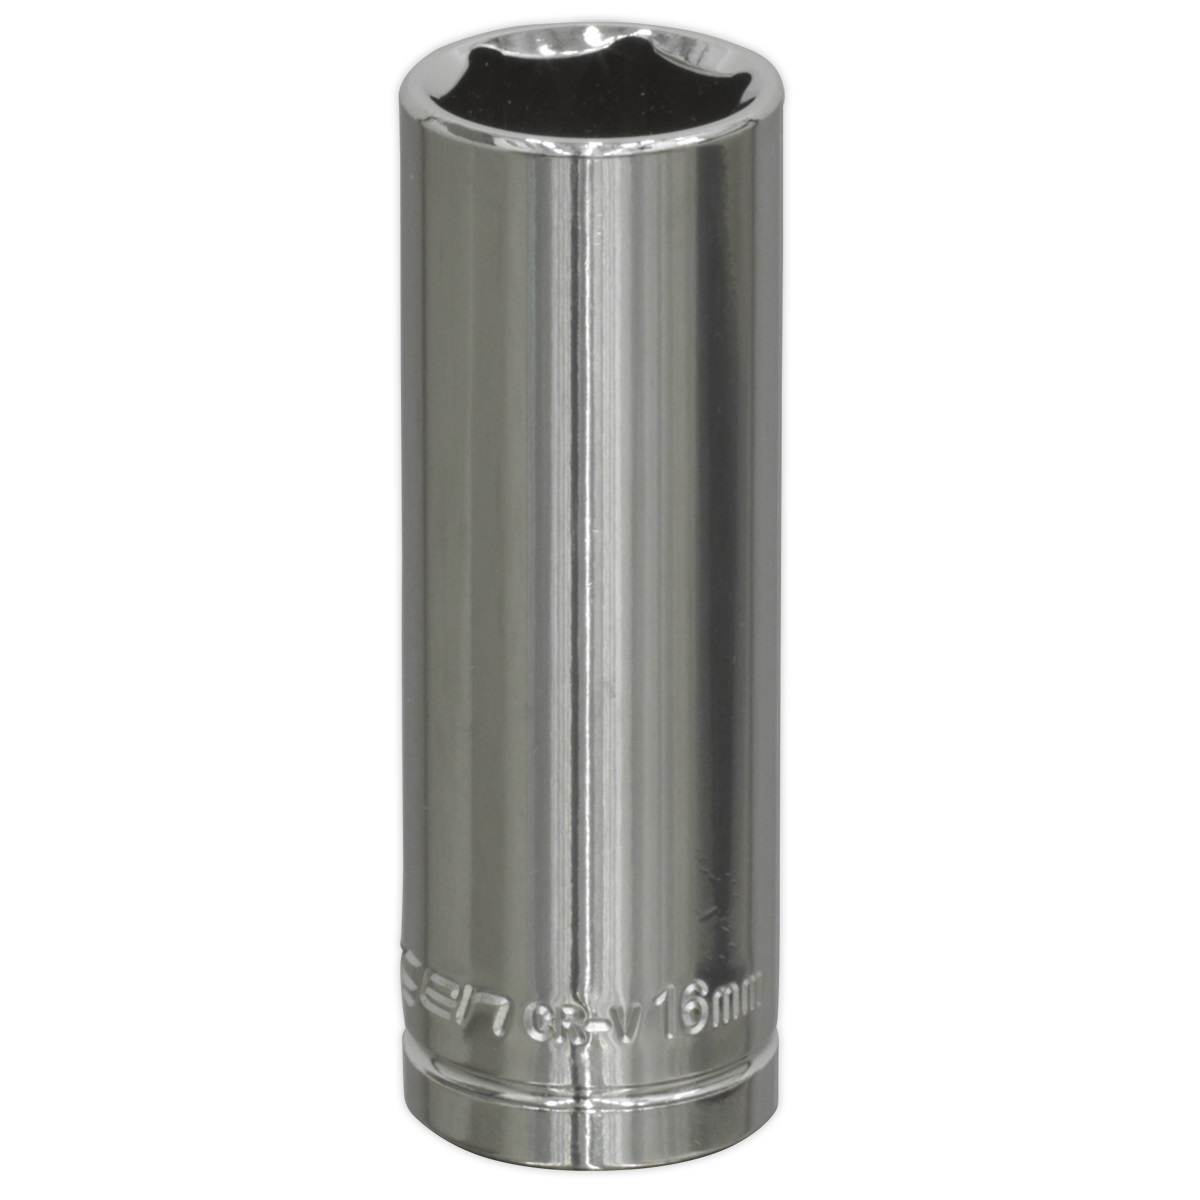 Sealey Siegen WallDrive® Socket 16mm Deep 3/8"Sq Drive S0594 | Hardened and tempered for added strength. | toolforce.ie